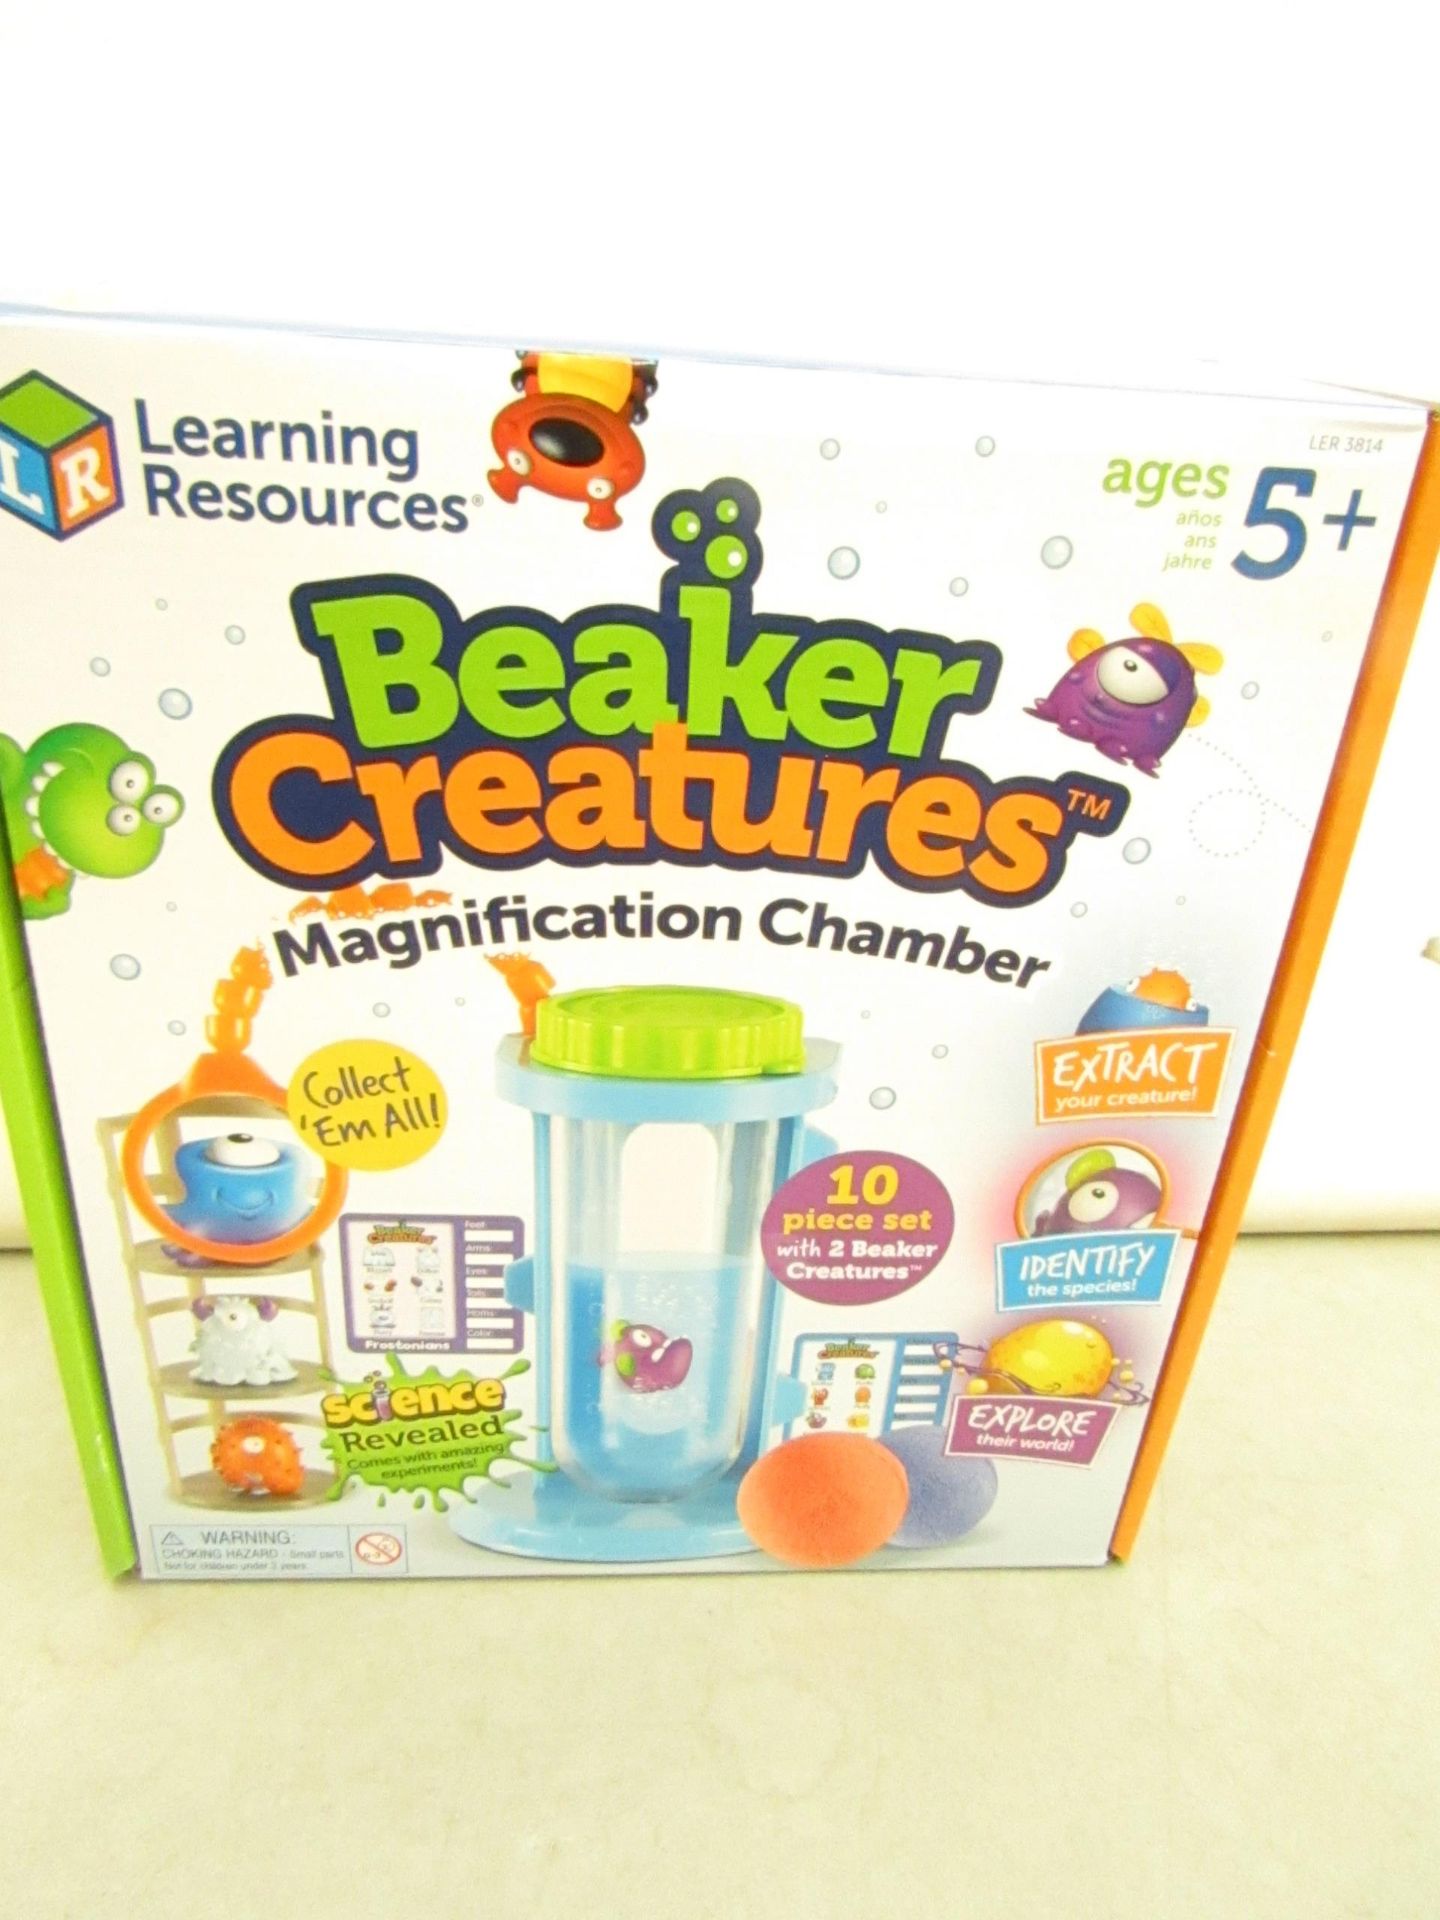 Learning resources Beaker Creations Magnification Chamber 10 Piece set with 2 Beaker creations.